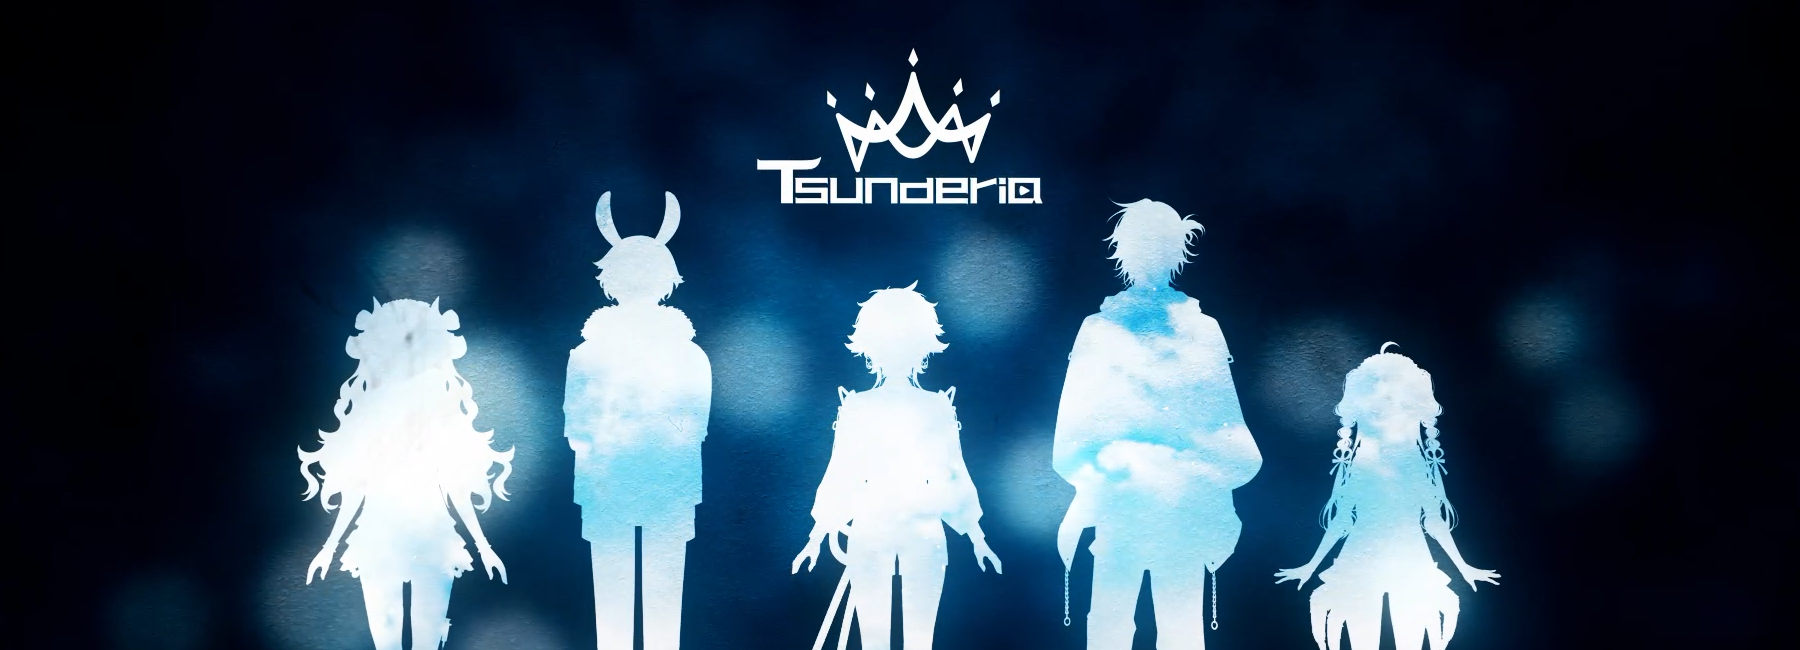 Tsunderia's 3rd Generation, Tsundream, is officially announced! They will debut on November 6th and 7th, 2021.